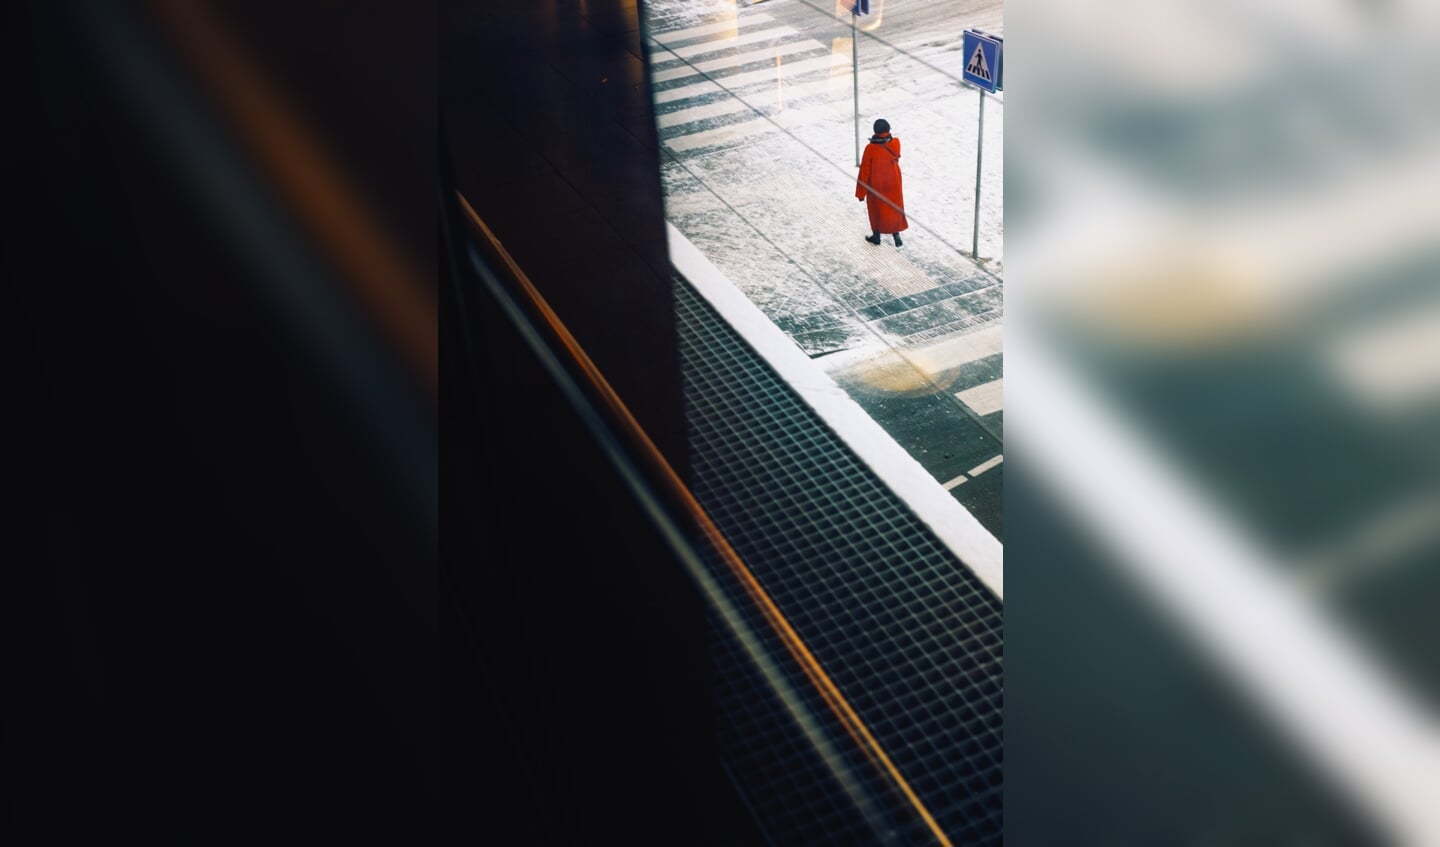 Woman in Red, Amsterdam Airport Schiphol.